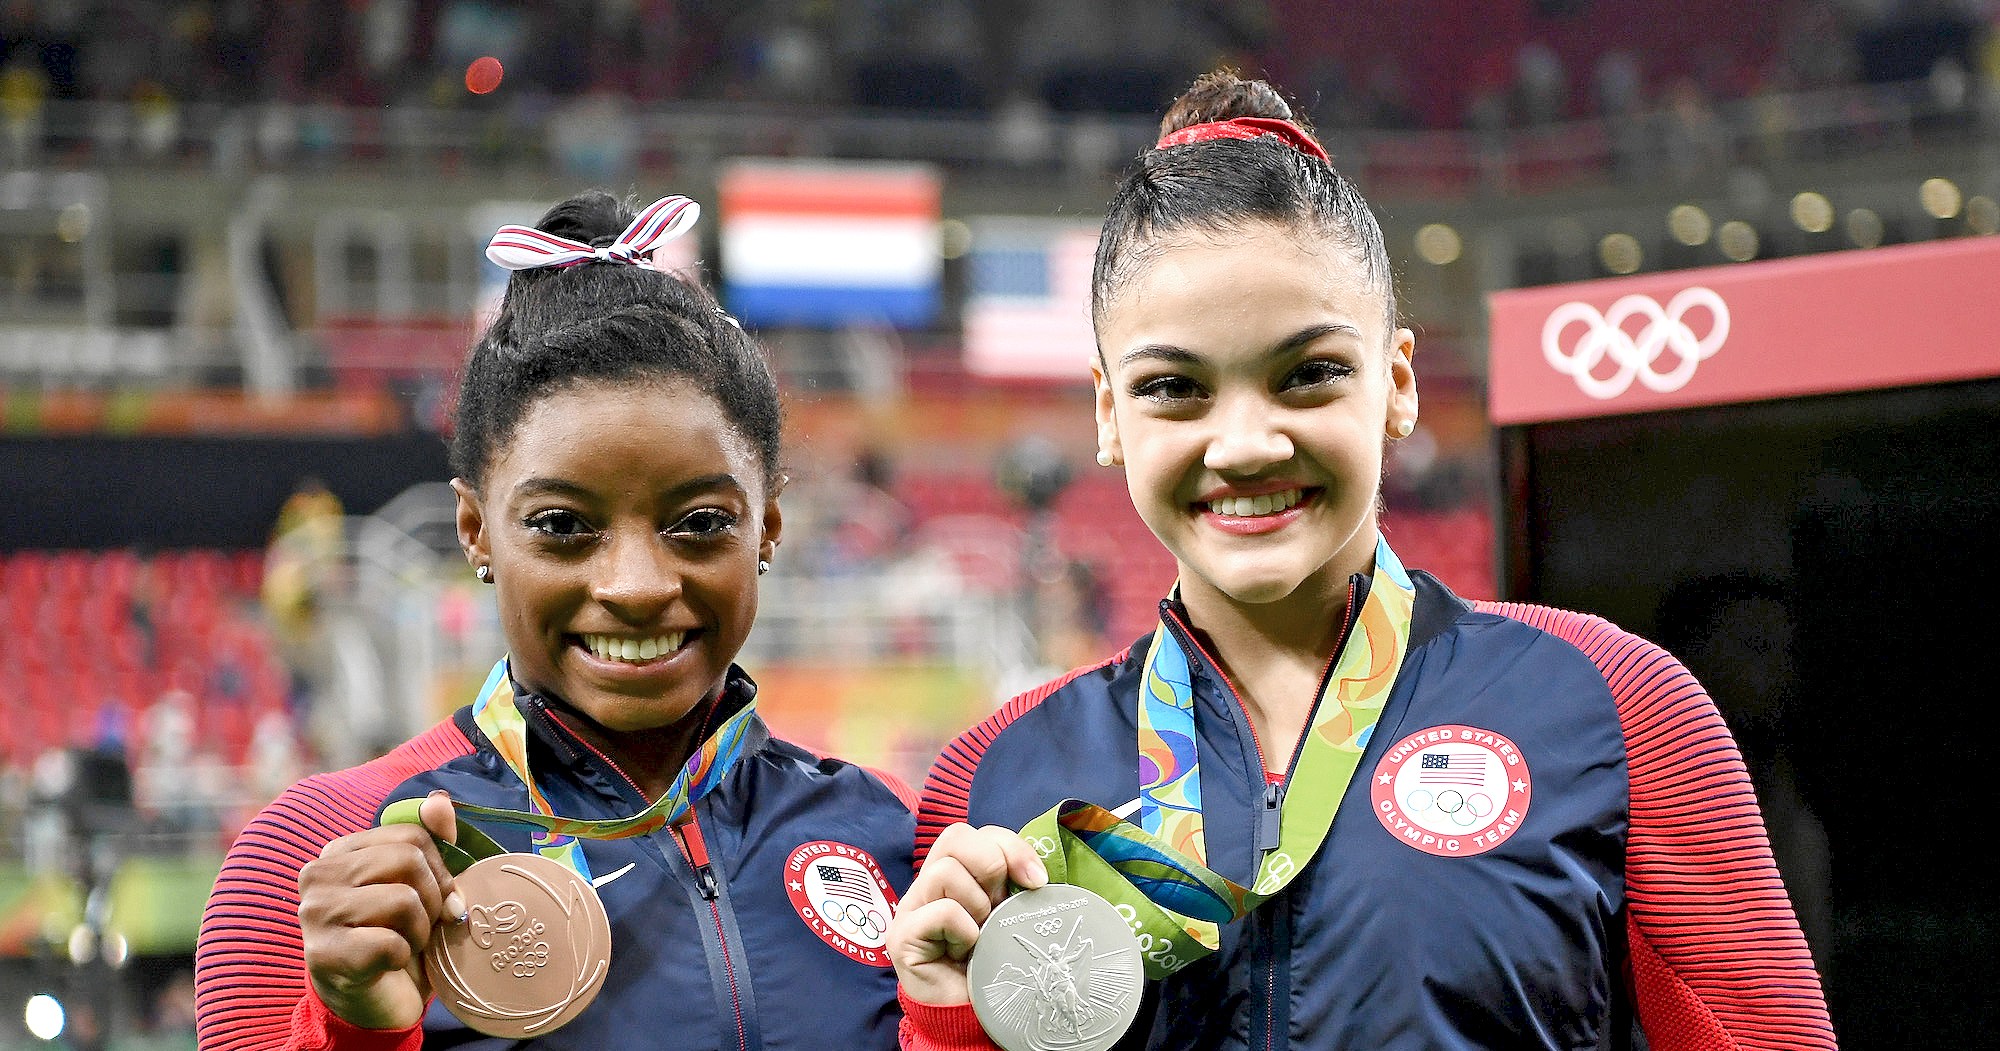 Laurie Hernandez Spills the Beans on Gymnasts Joining Simone Biles at Olympics! Get the Inside Scoop Here!